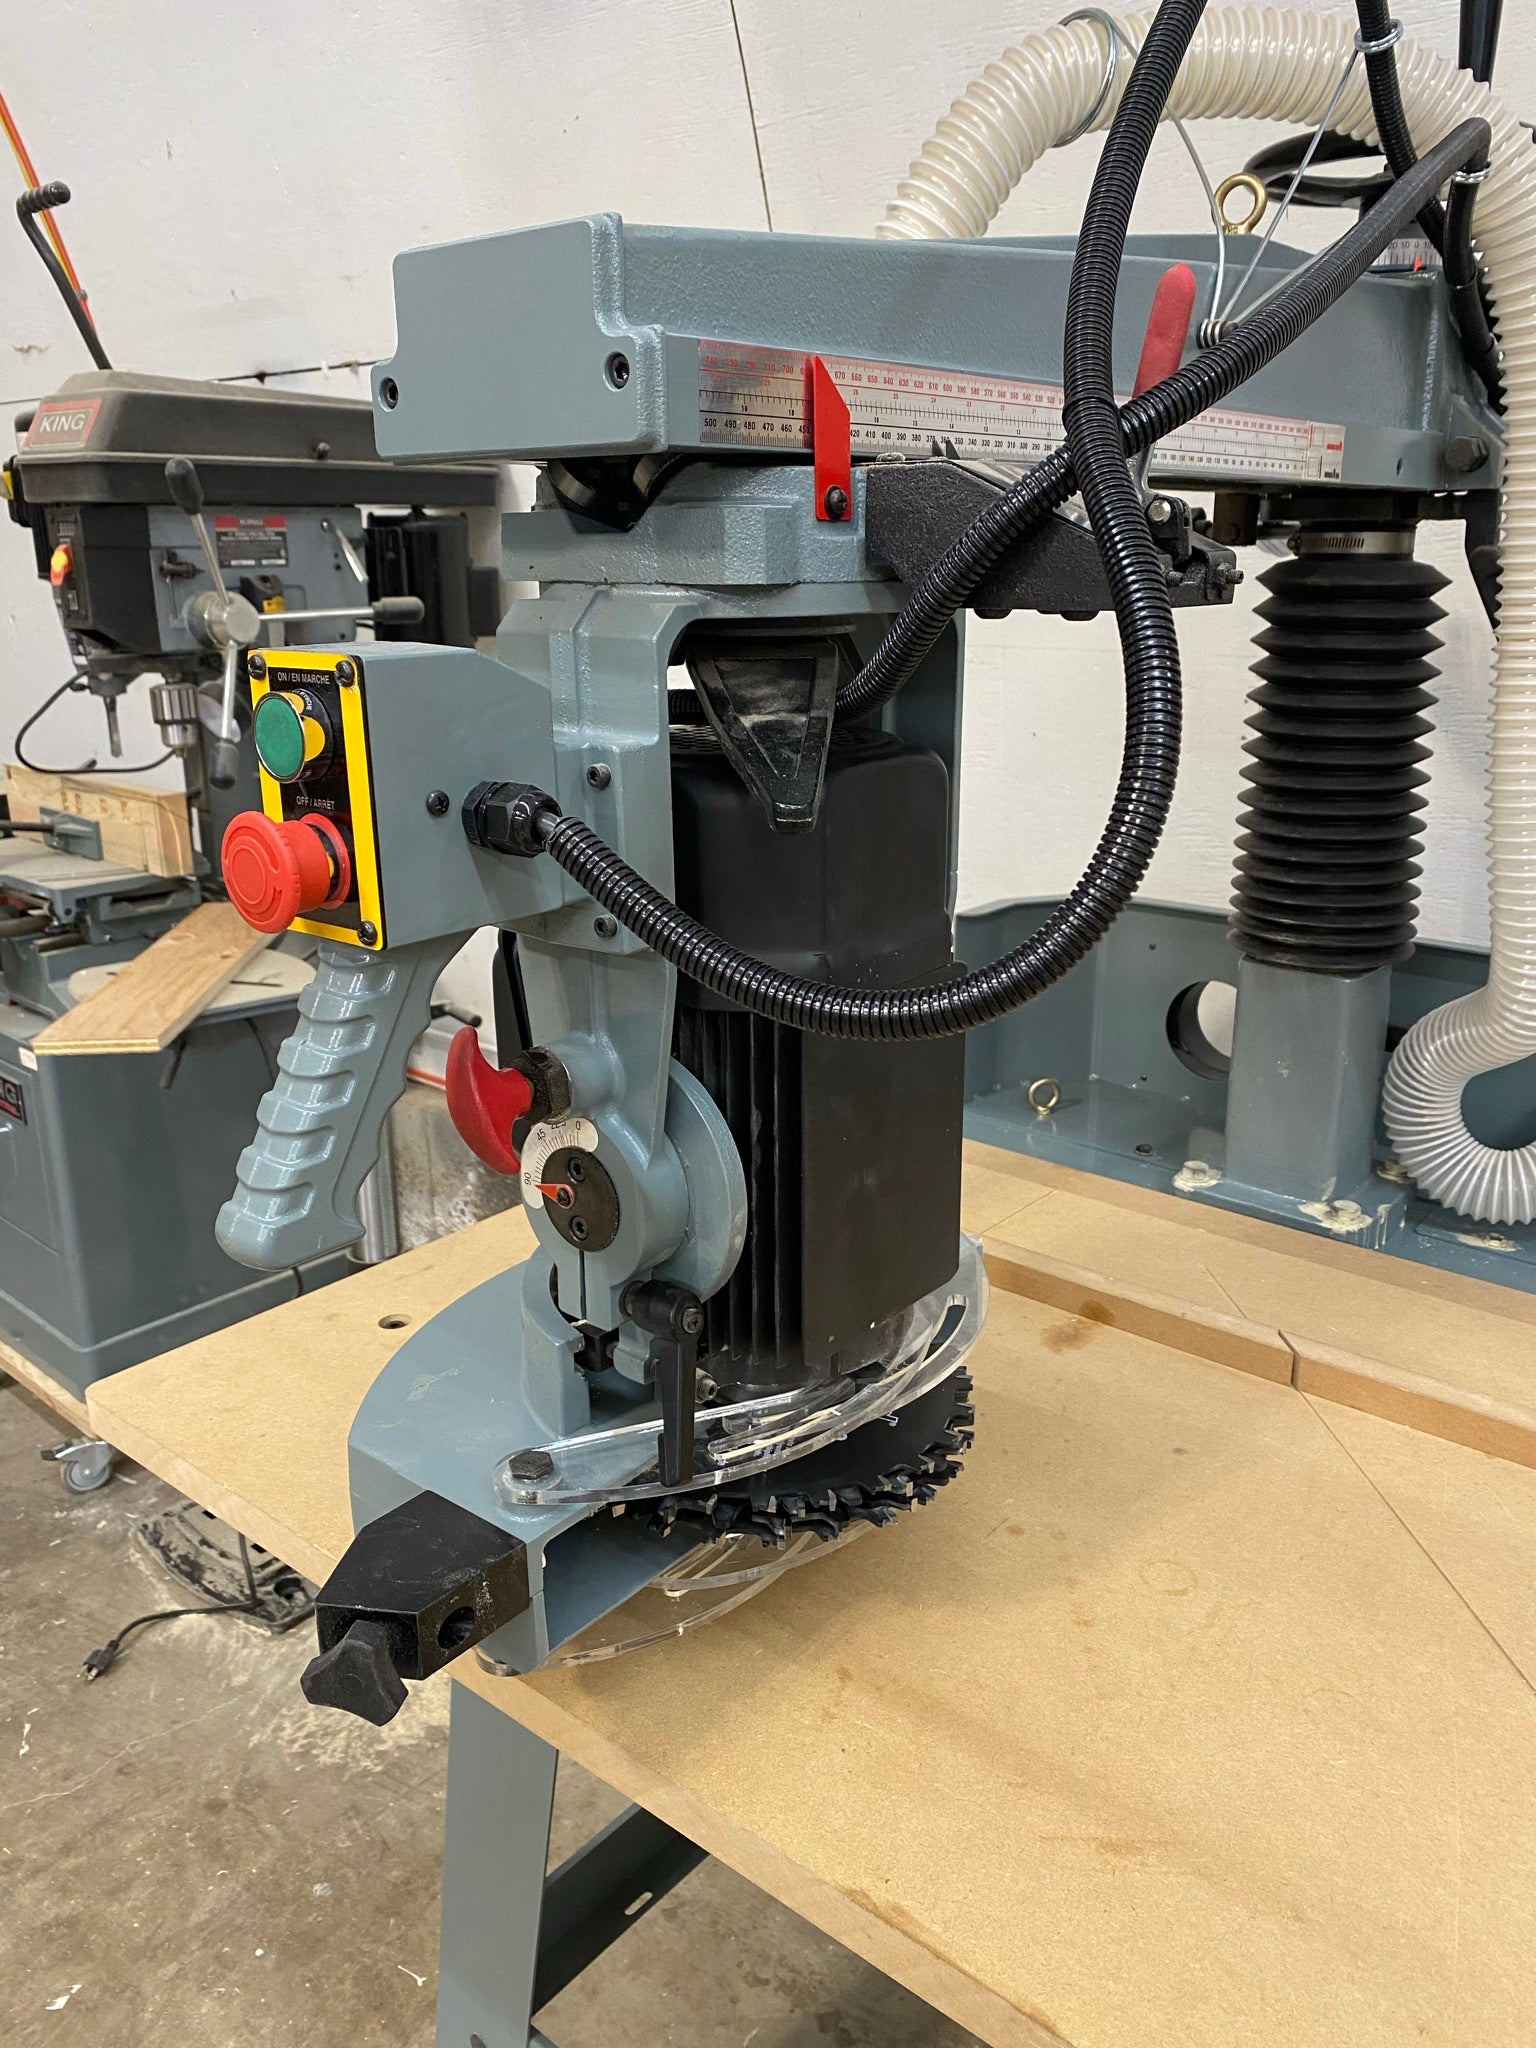 Radial Arm Saw extended